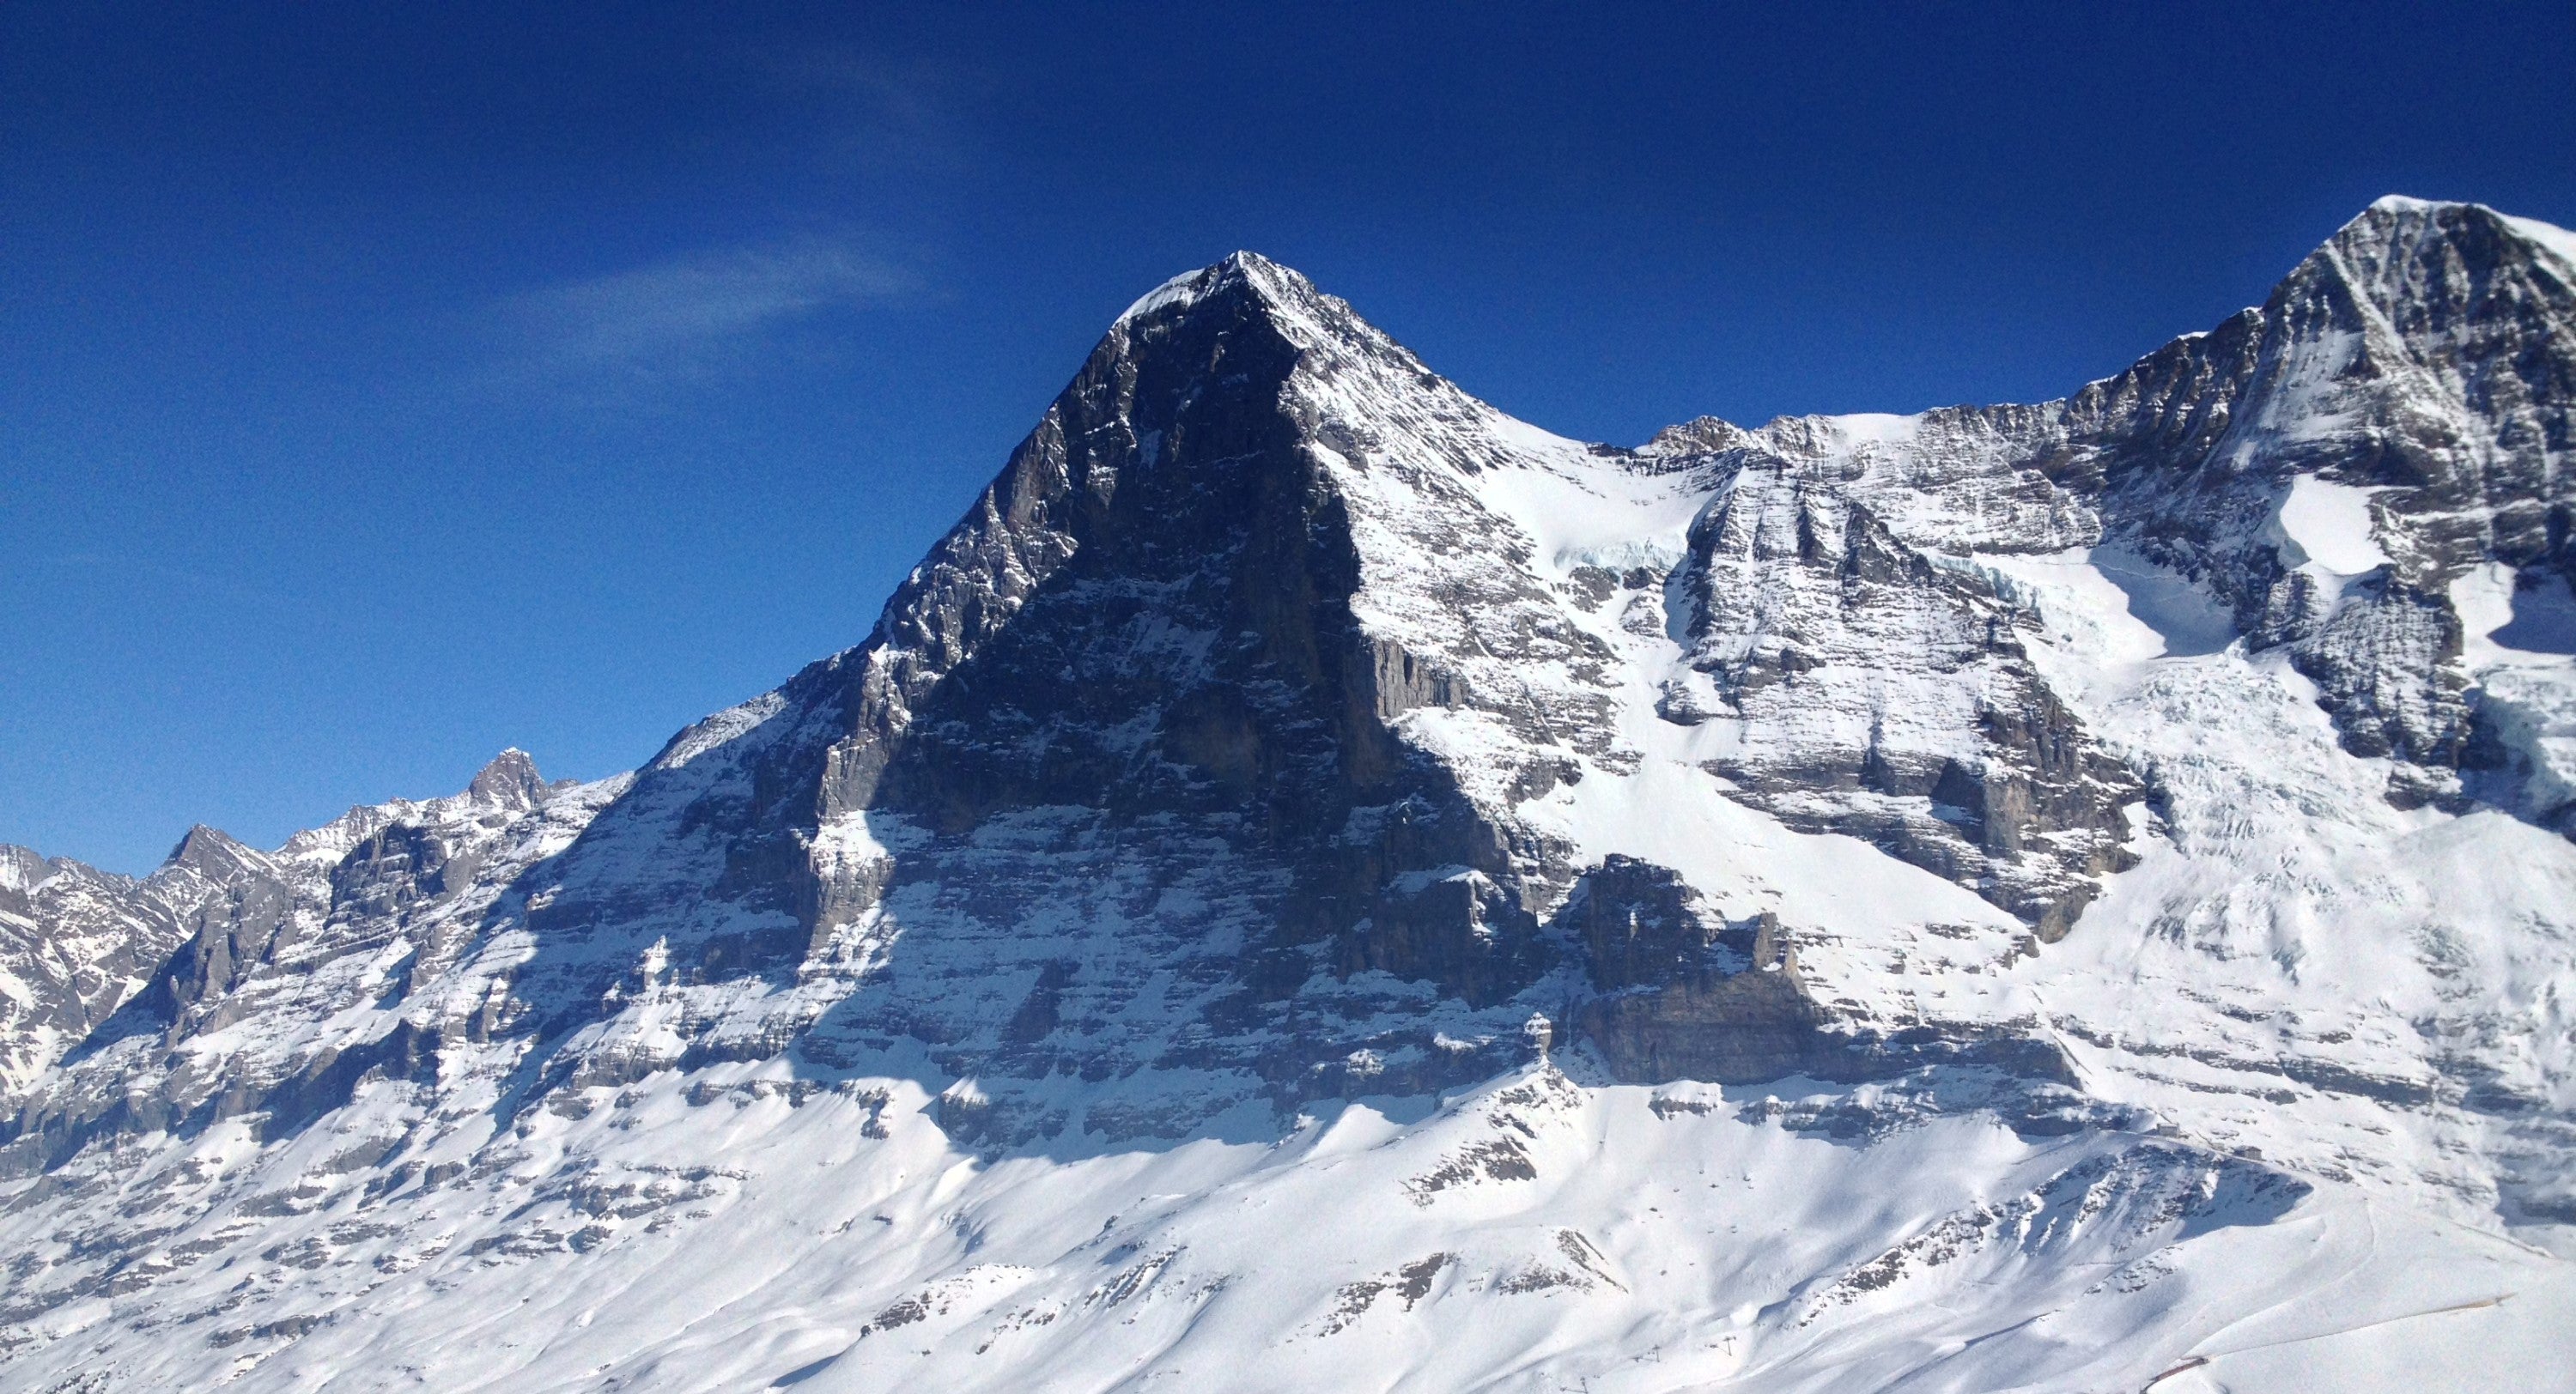 Eiger North Face in shade, blue sky and snow